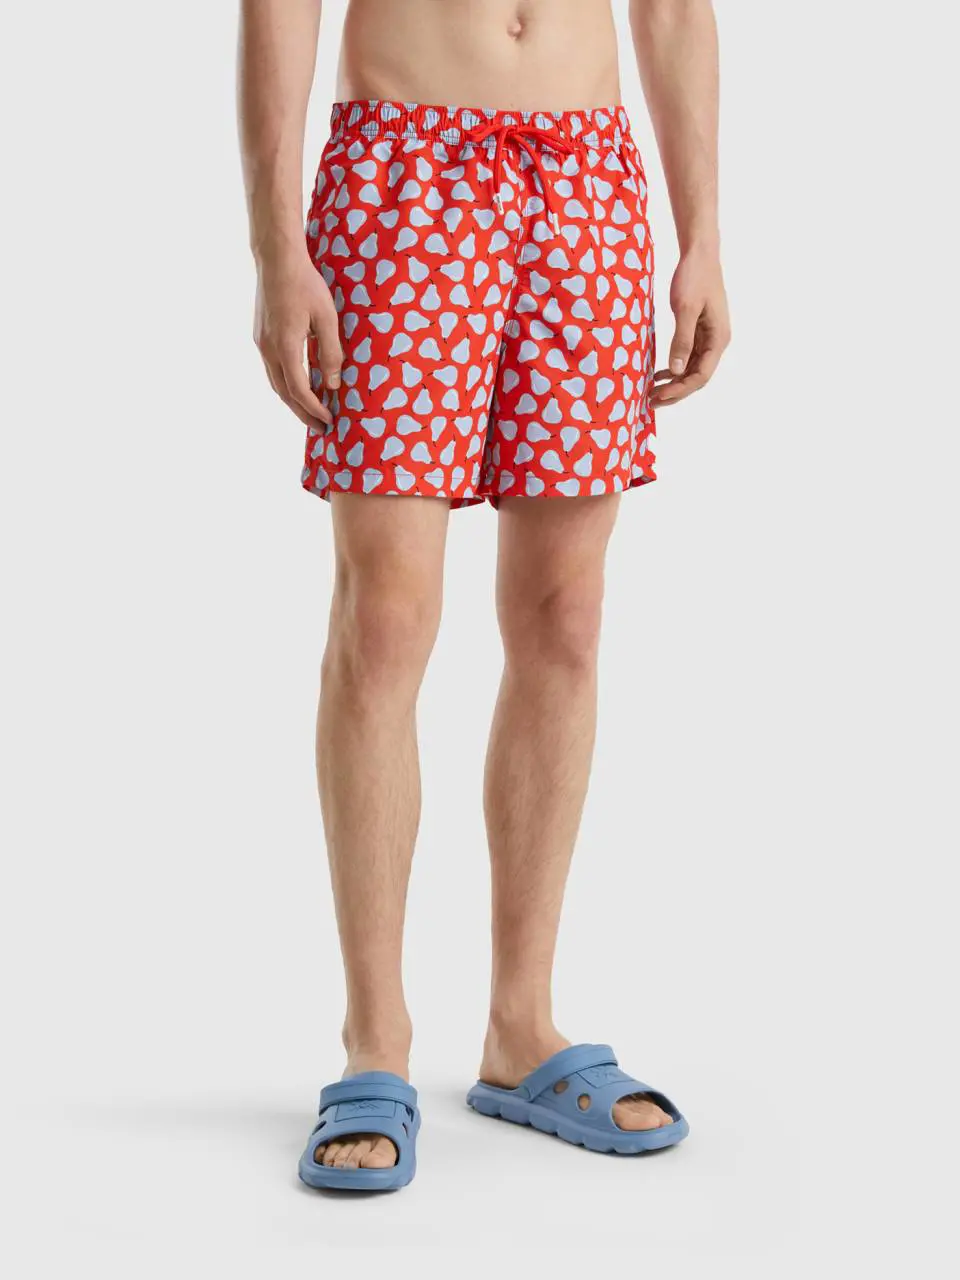 Benetton red swim trunks with pear pattern. 1